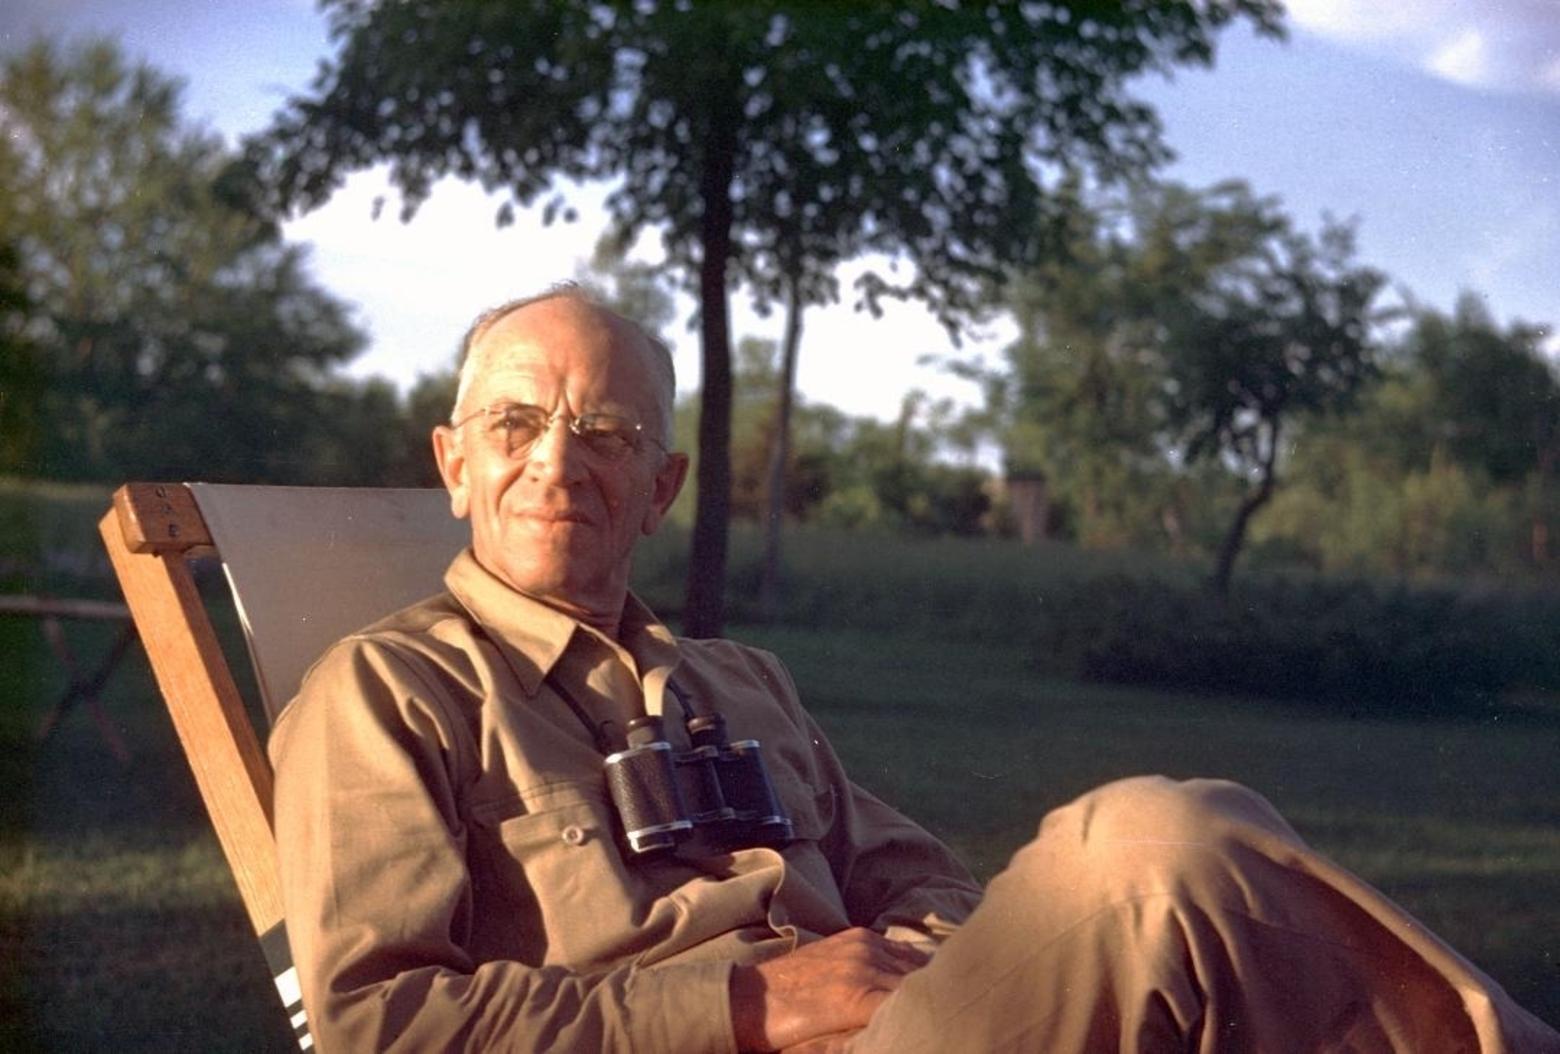 Aldo Leopold didn't live long enough to see A Sand County Almanac into print but since its publication millions of copies have been sold with individual essays read many times more.  The book is considered one of the most important read for giving even lay people an understanding of what true stewardship entails.  Photo courtesy Aldo Leopold Foundation. (www.aldoleopold.org)